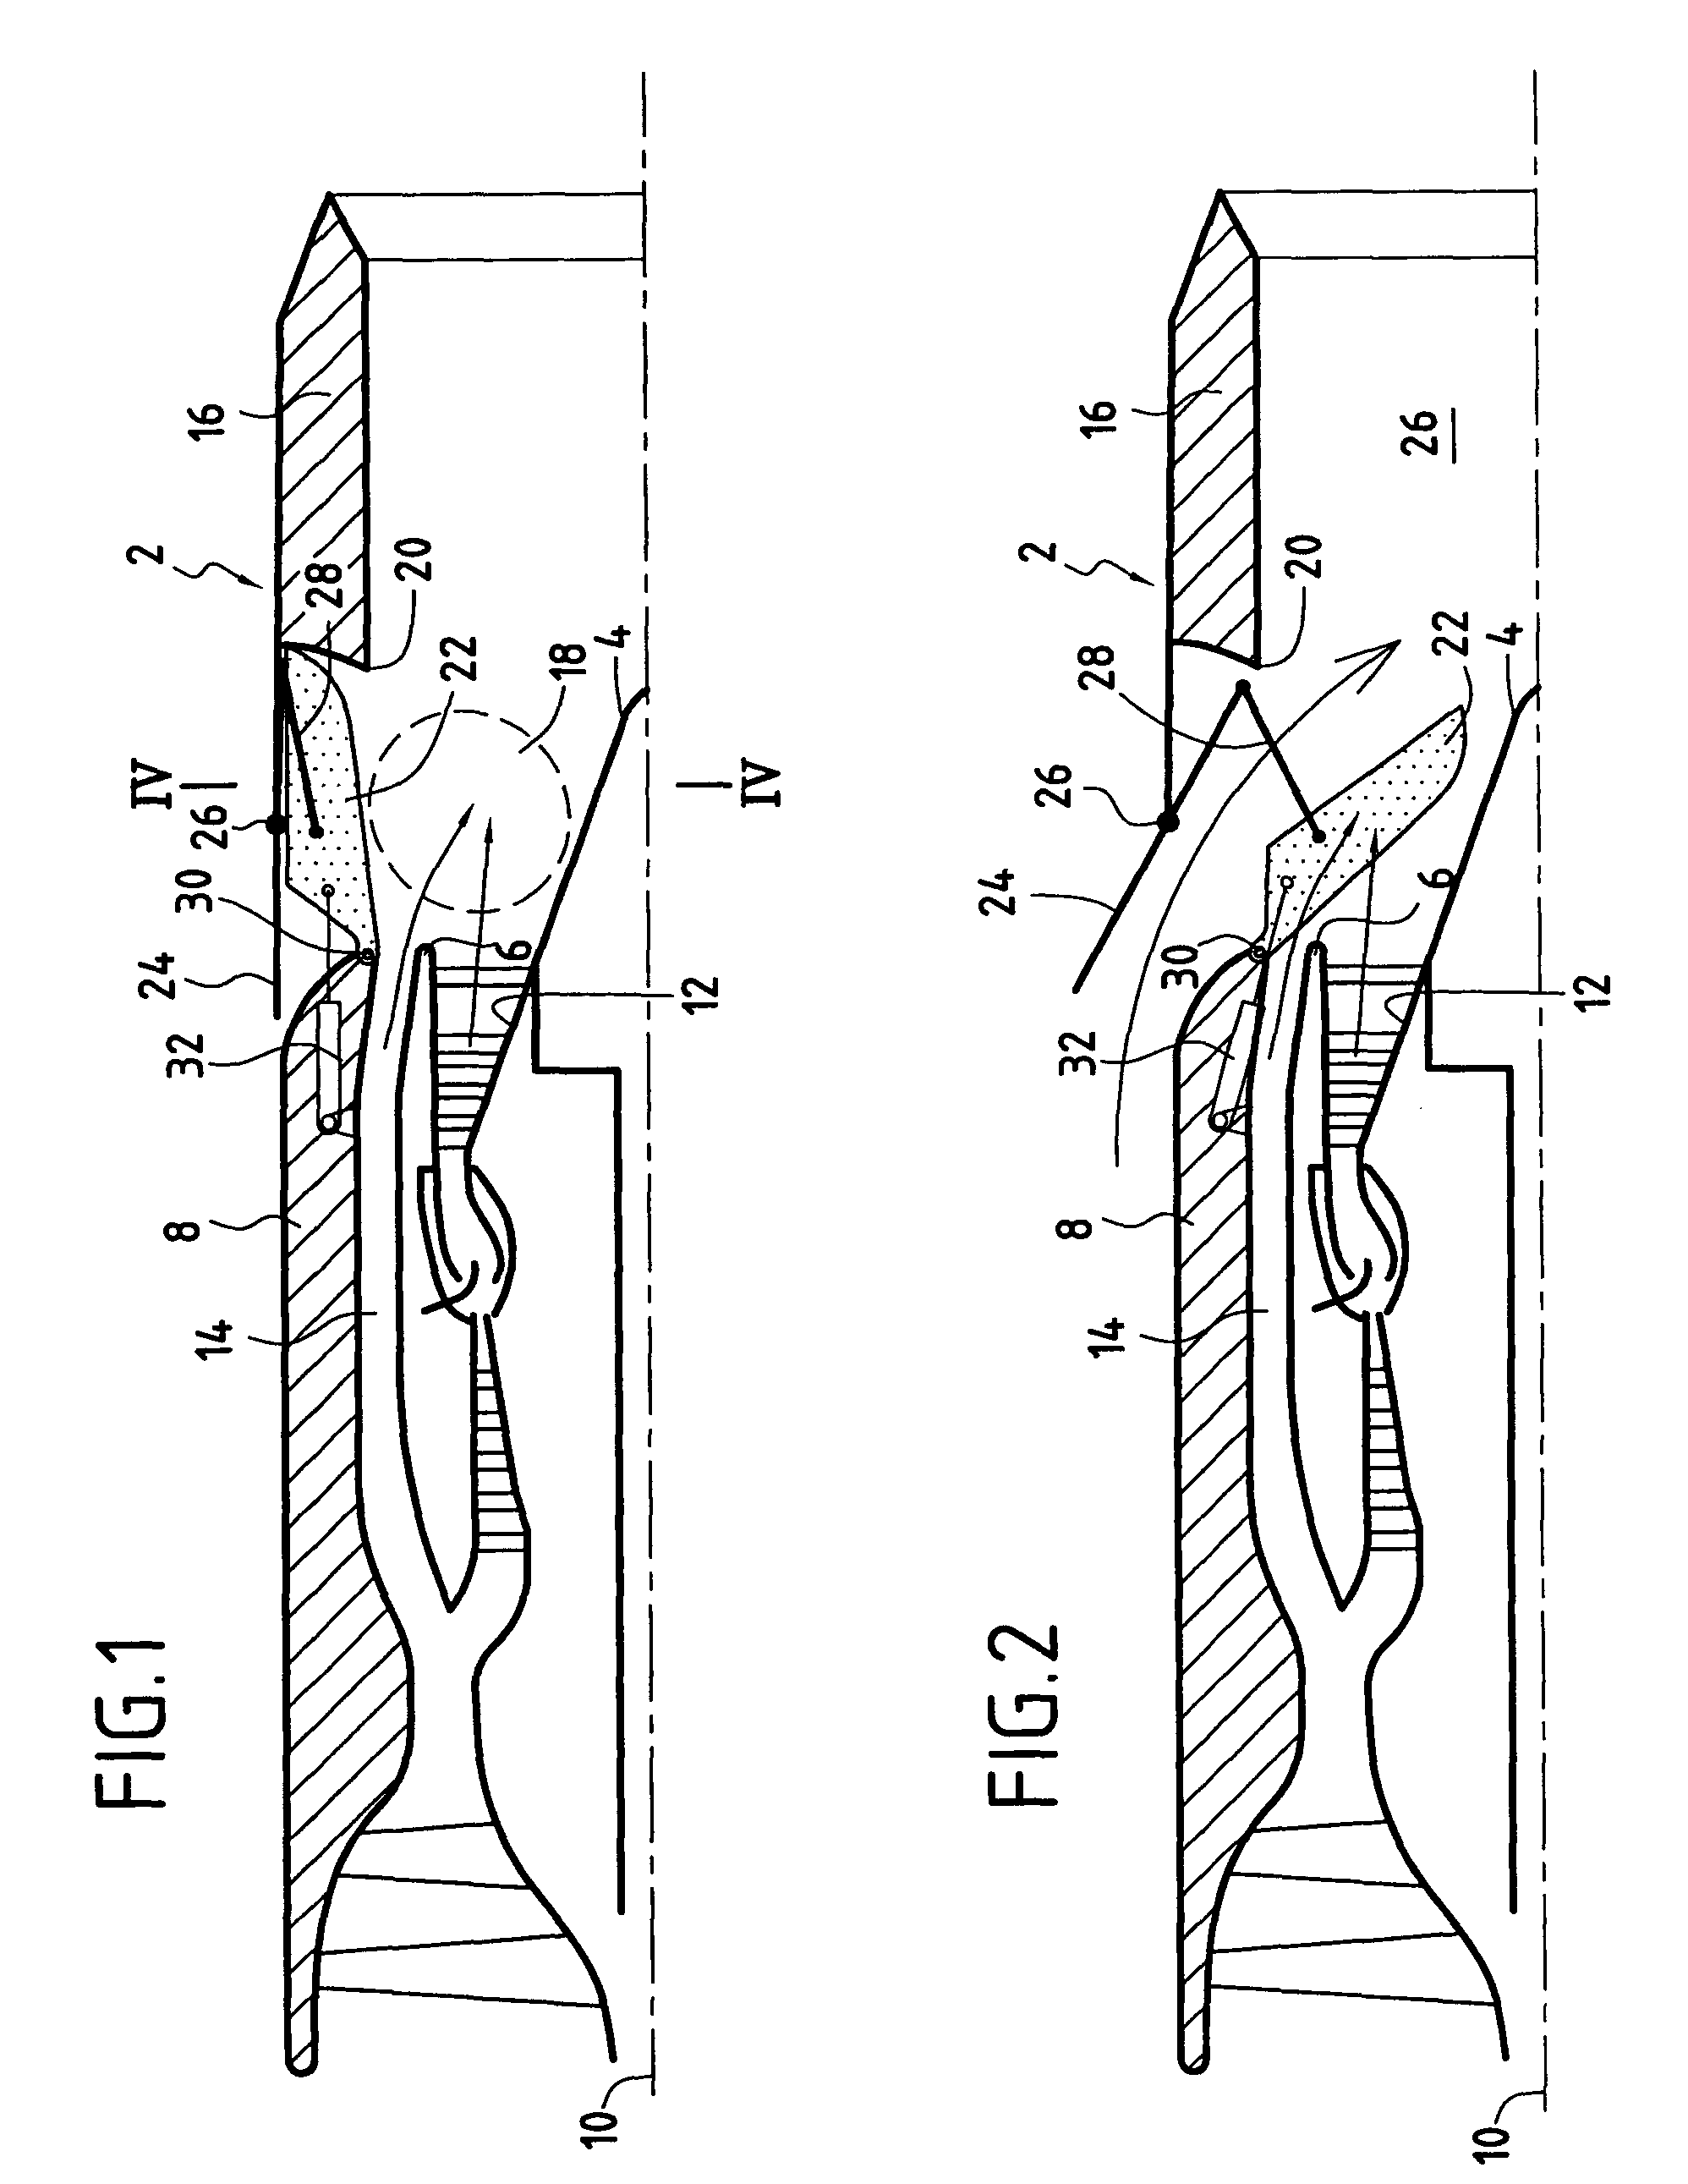 Variable-section flow mixer for a double-flow turbojet for a supersonic airplane